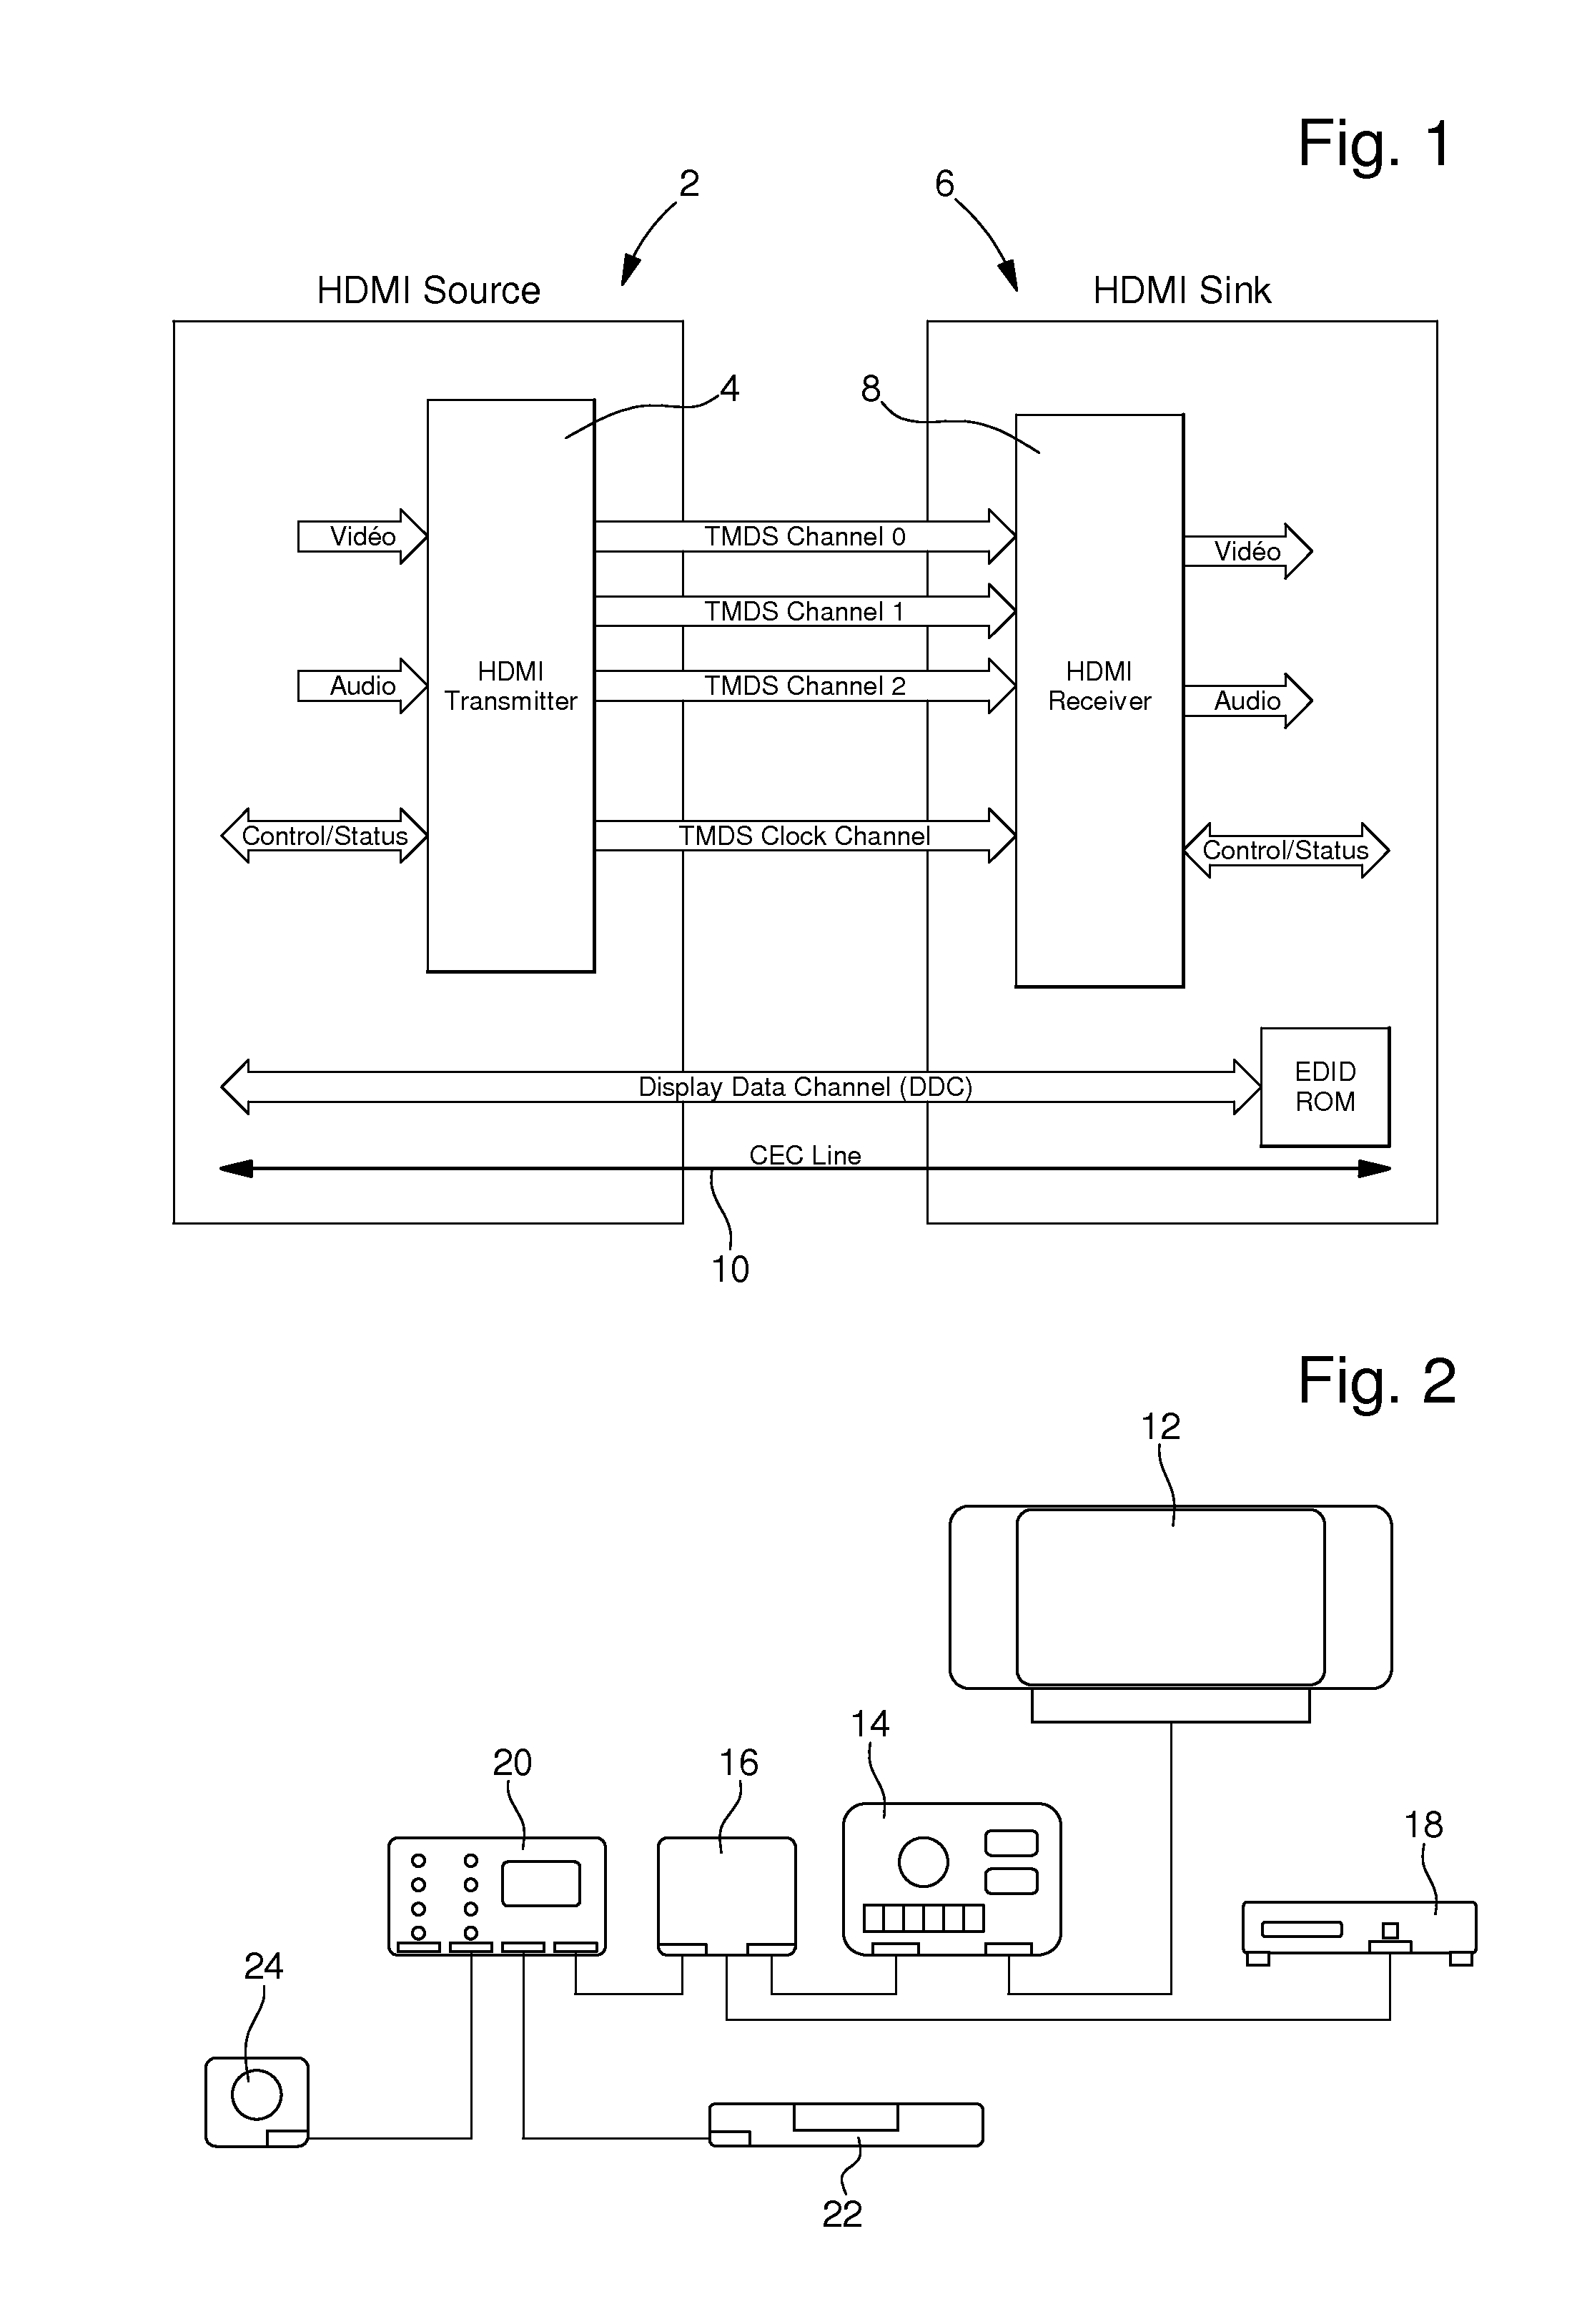 Installation or device with a high-definition multimedia interface